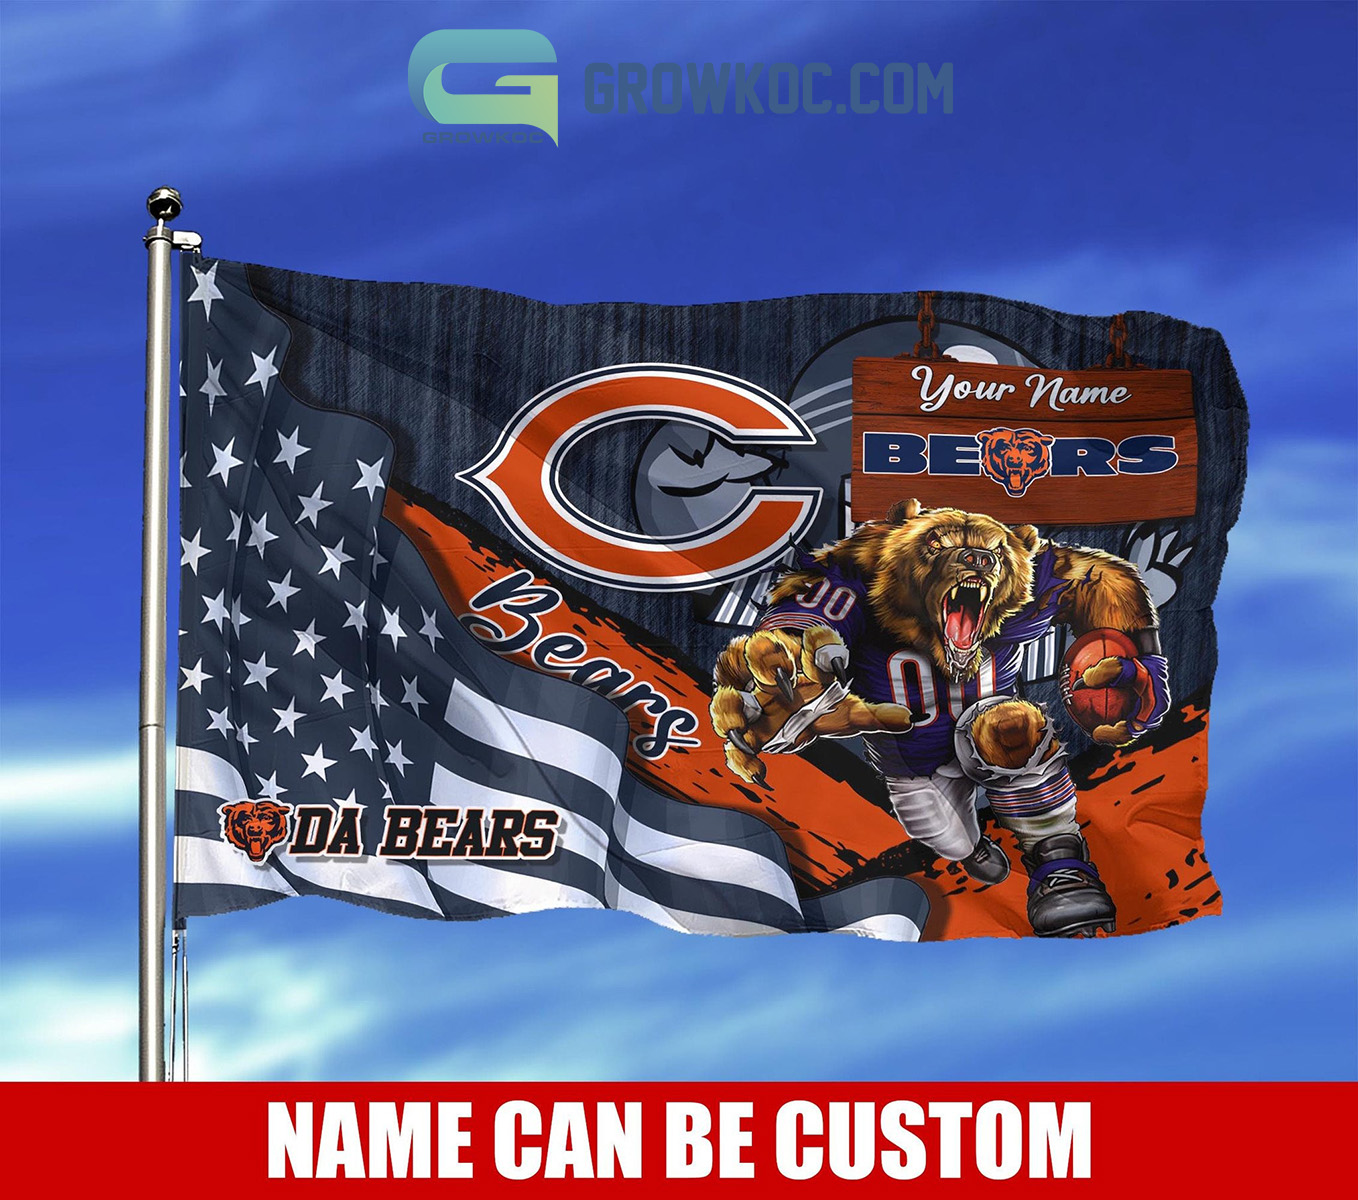 Chicago Bears logos, uniforms, and mascots